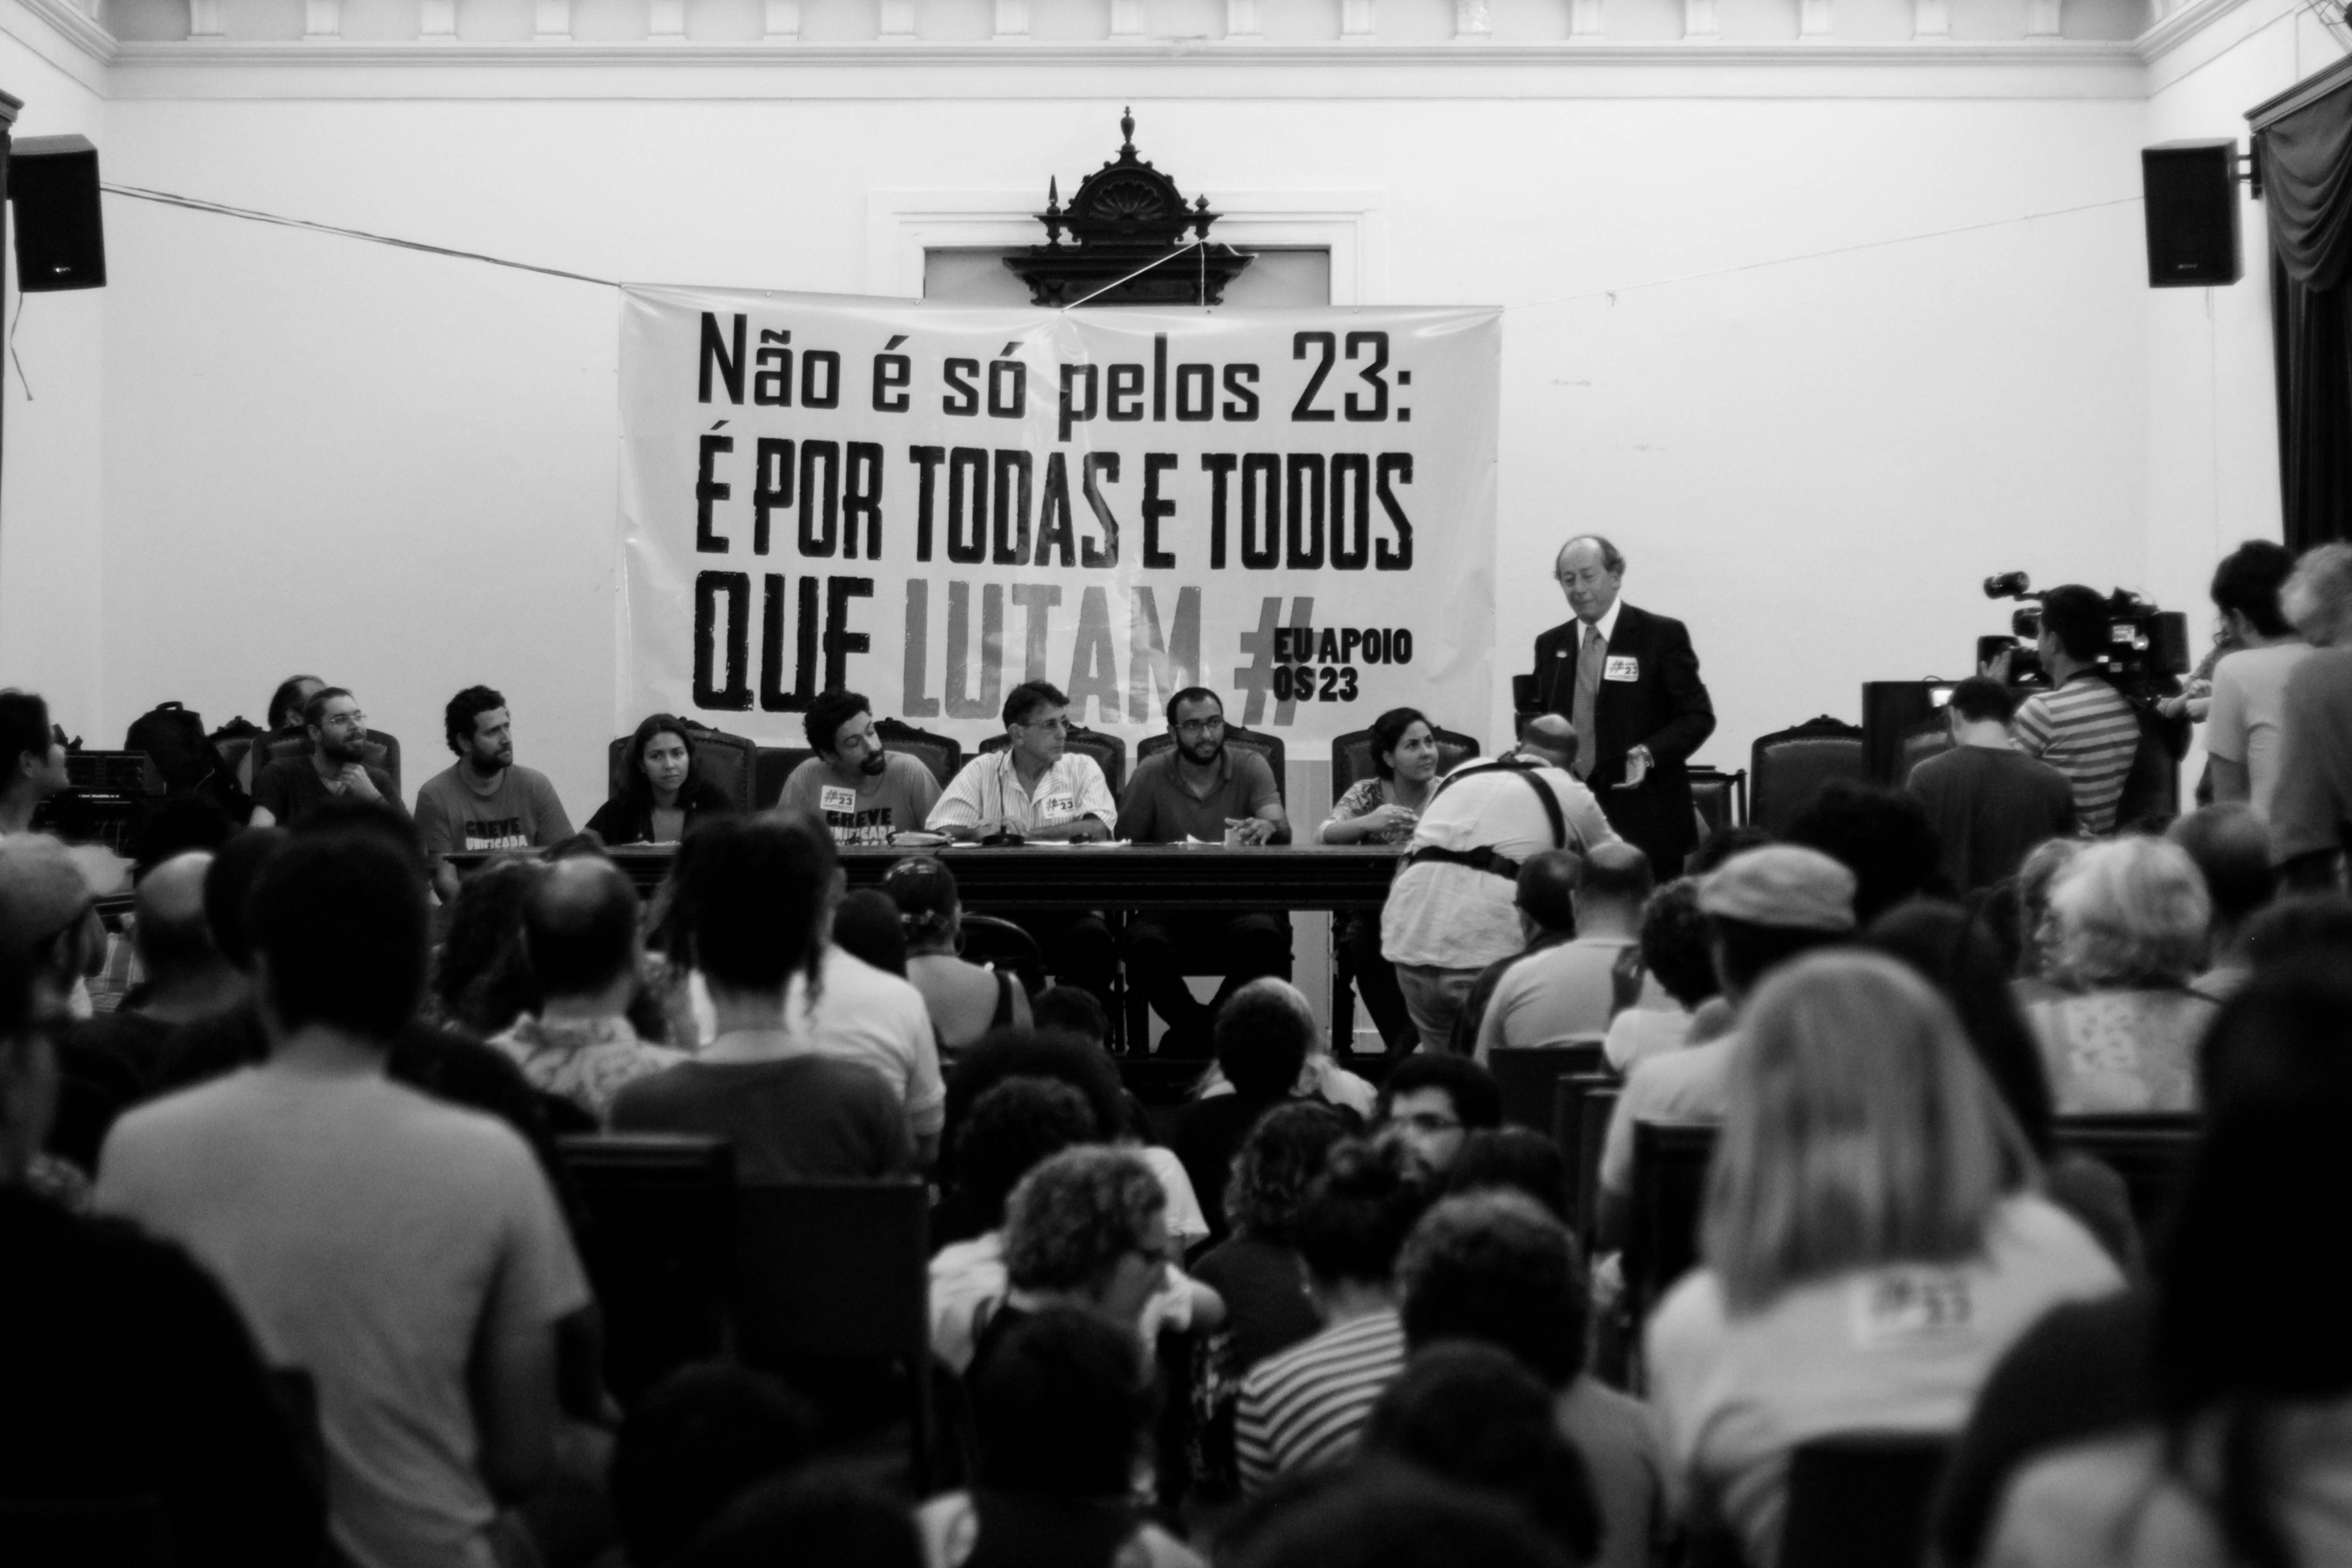 Launch of the campaign “It’s not just about the 23, it’s about all those who fight”, at UFRJ, in Rio de Janeiro. Photo: Bruna Freire/Ponte